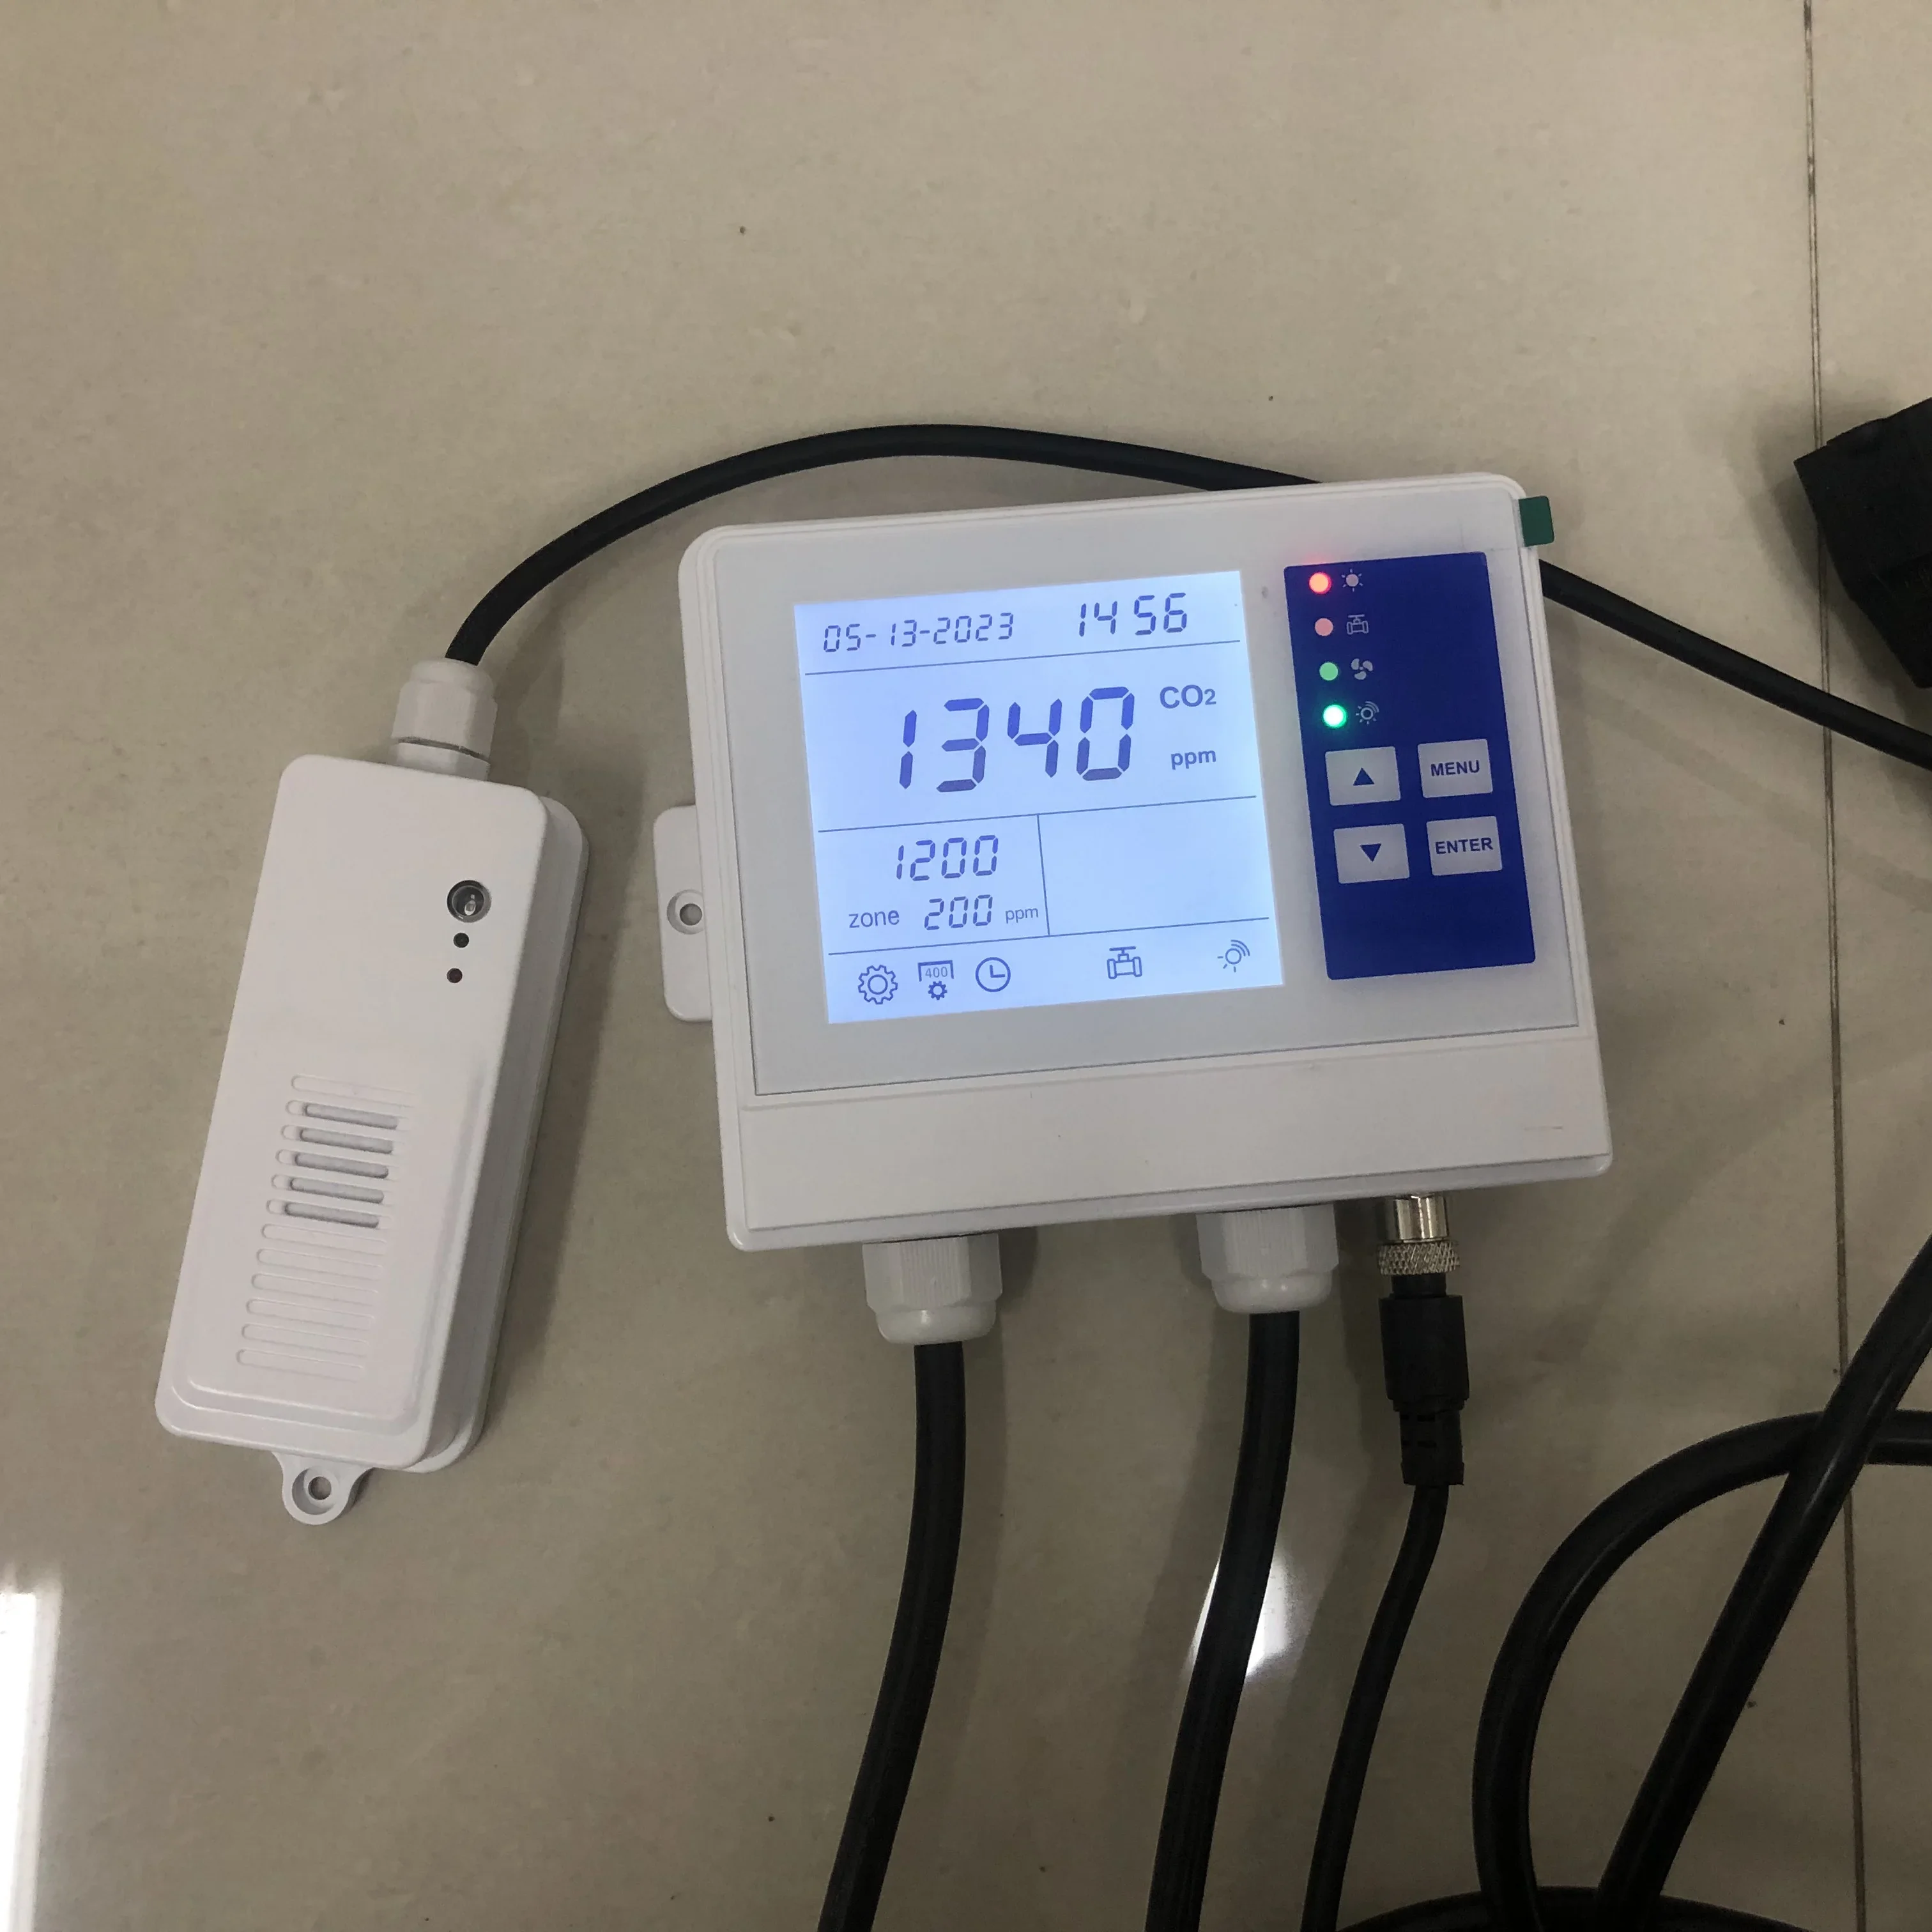 Long co2 sensor probe , wall mounted IAQ Carbon dioxide monitor controller with Relay output for co2 valve and ventilation